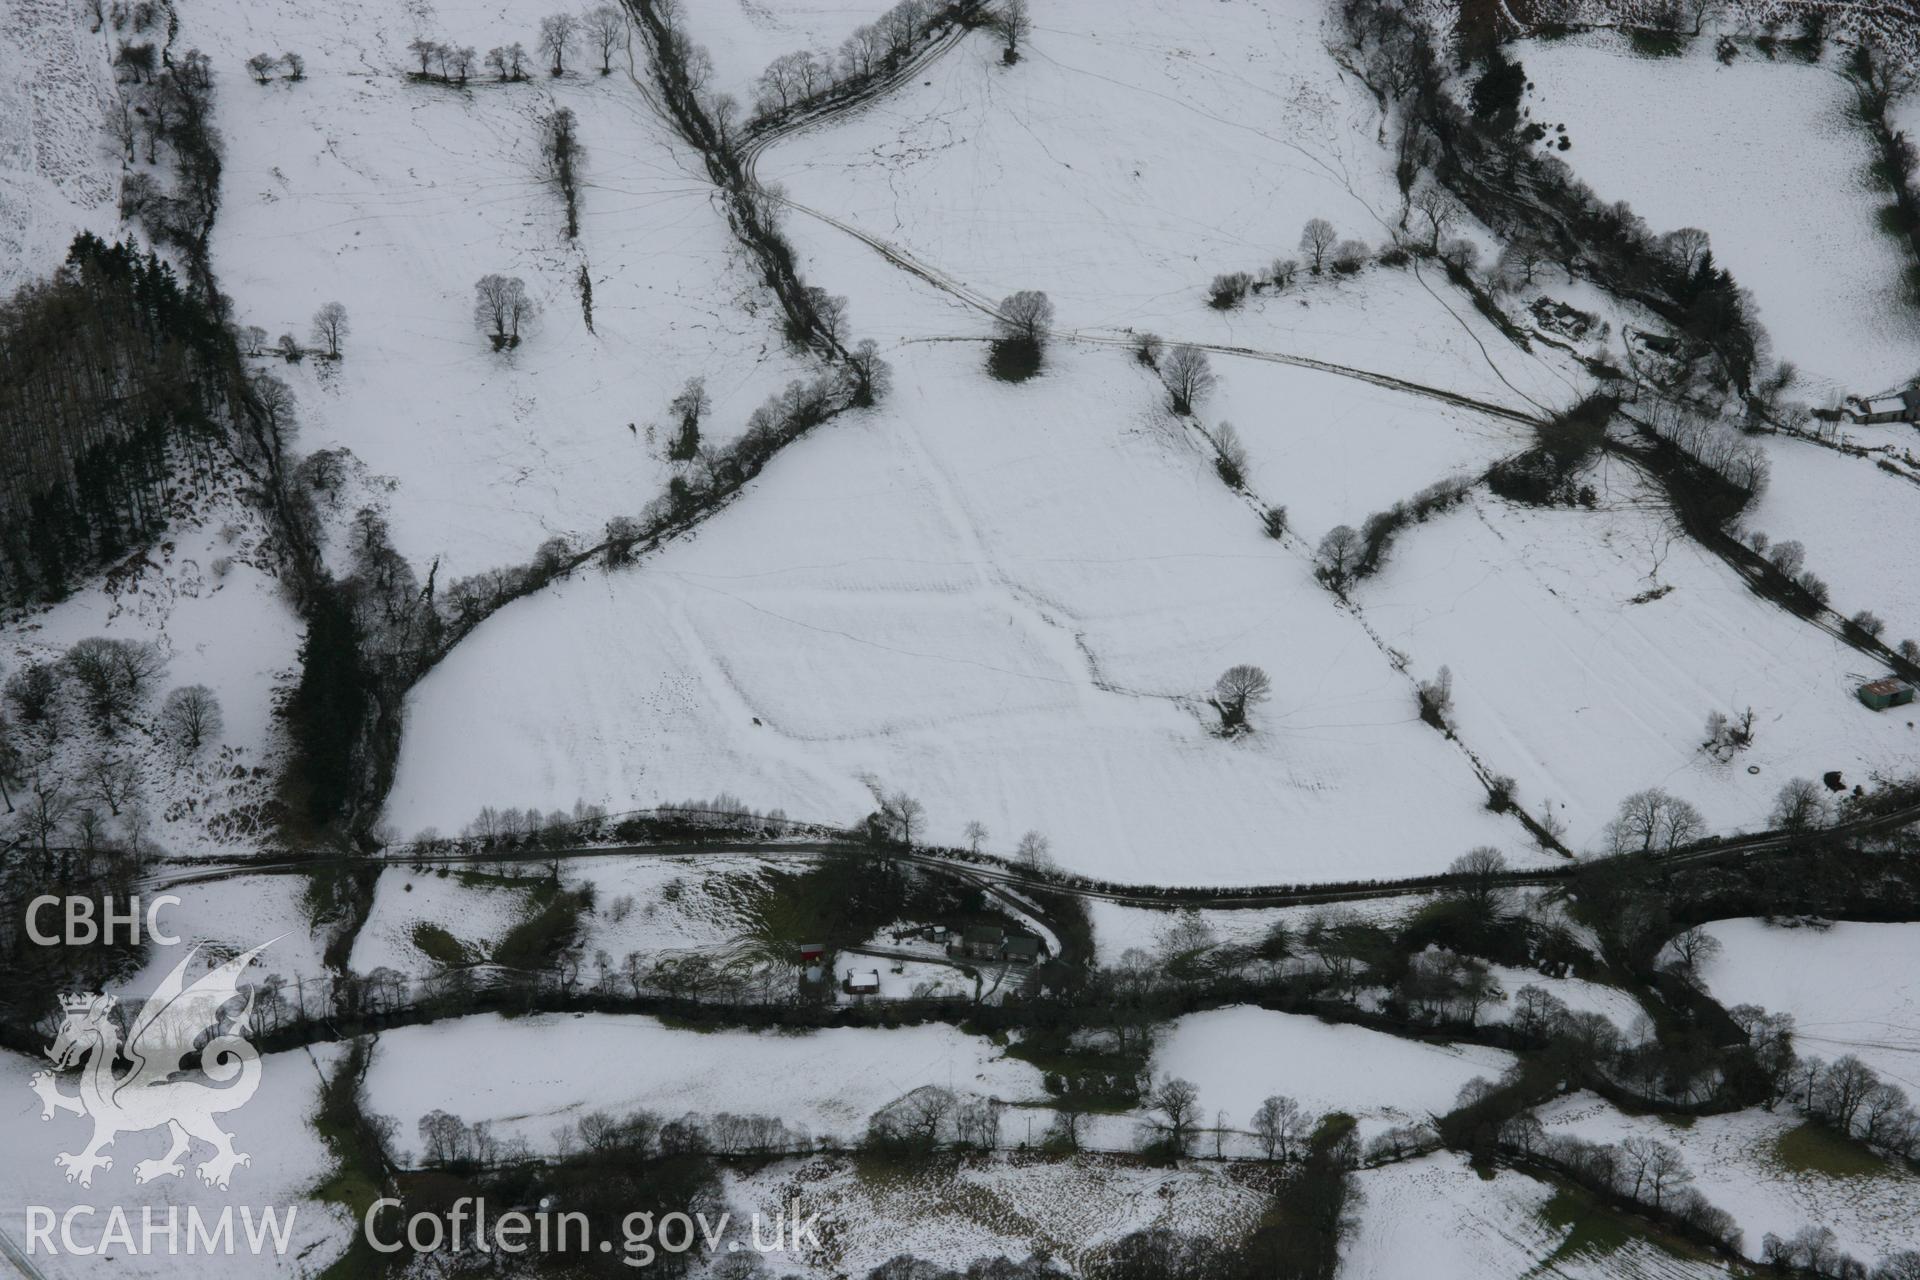 RCAHMW colour oblique aerial photograph of Nant Buarth-Glas Field System, viewed from the north-east under snow. Taken on 06 March 2006 by Toby Driver.